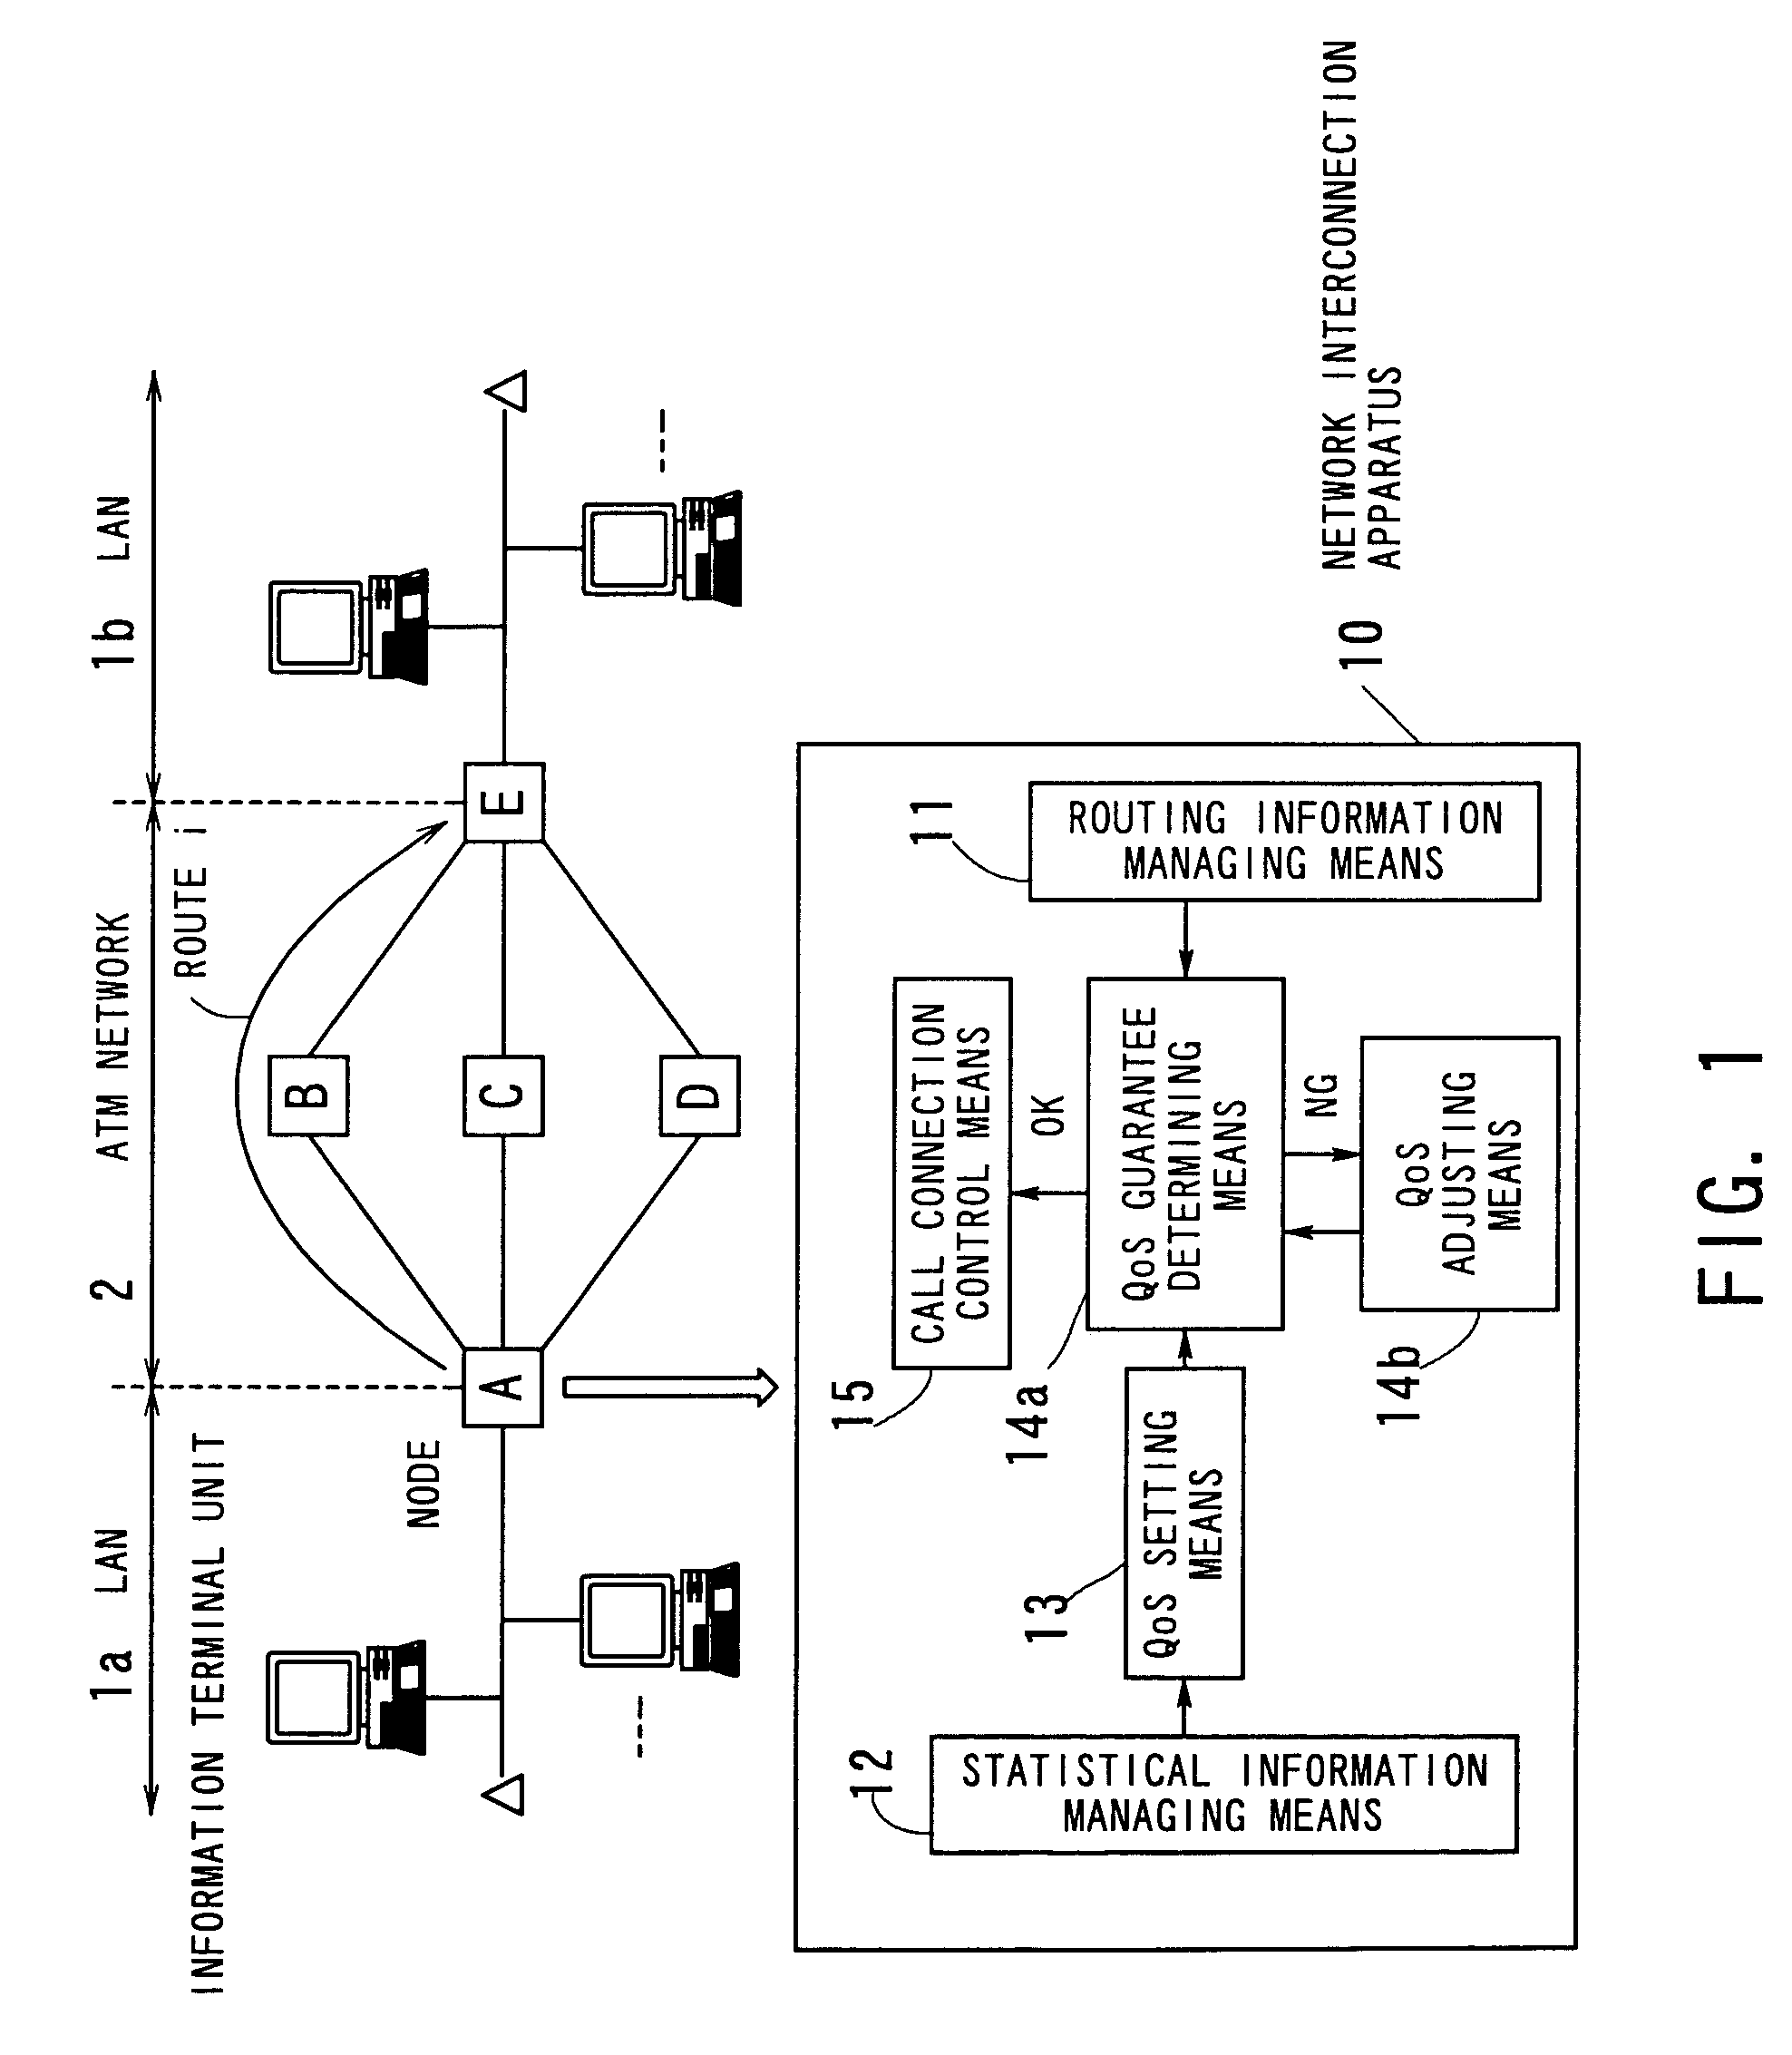 Network interconnection apparatus for interconnecting a LAN and an ATM network using QoS adjustment